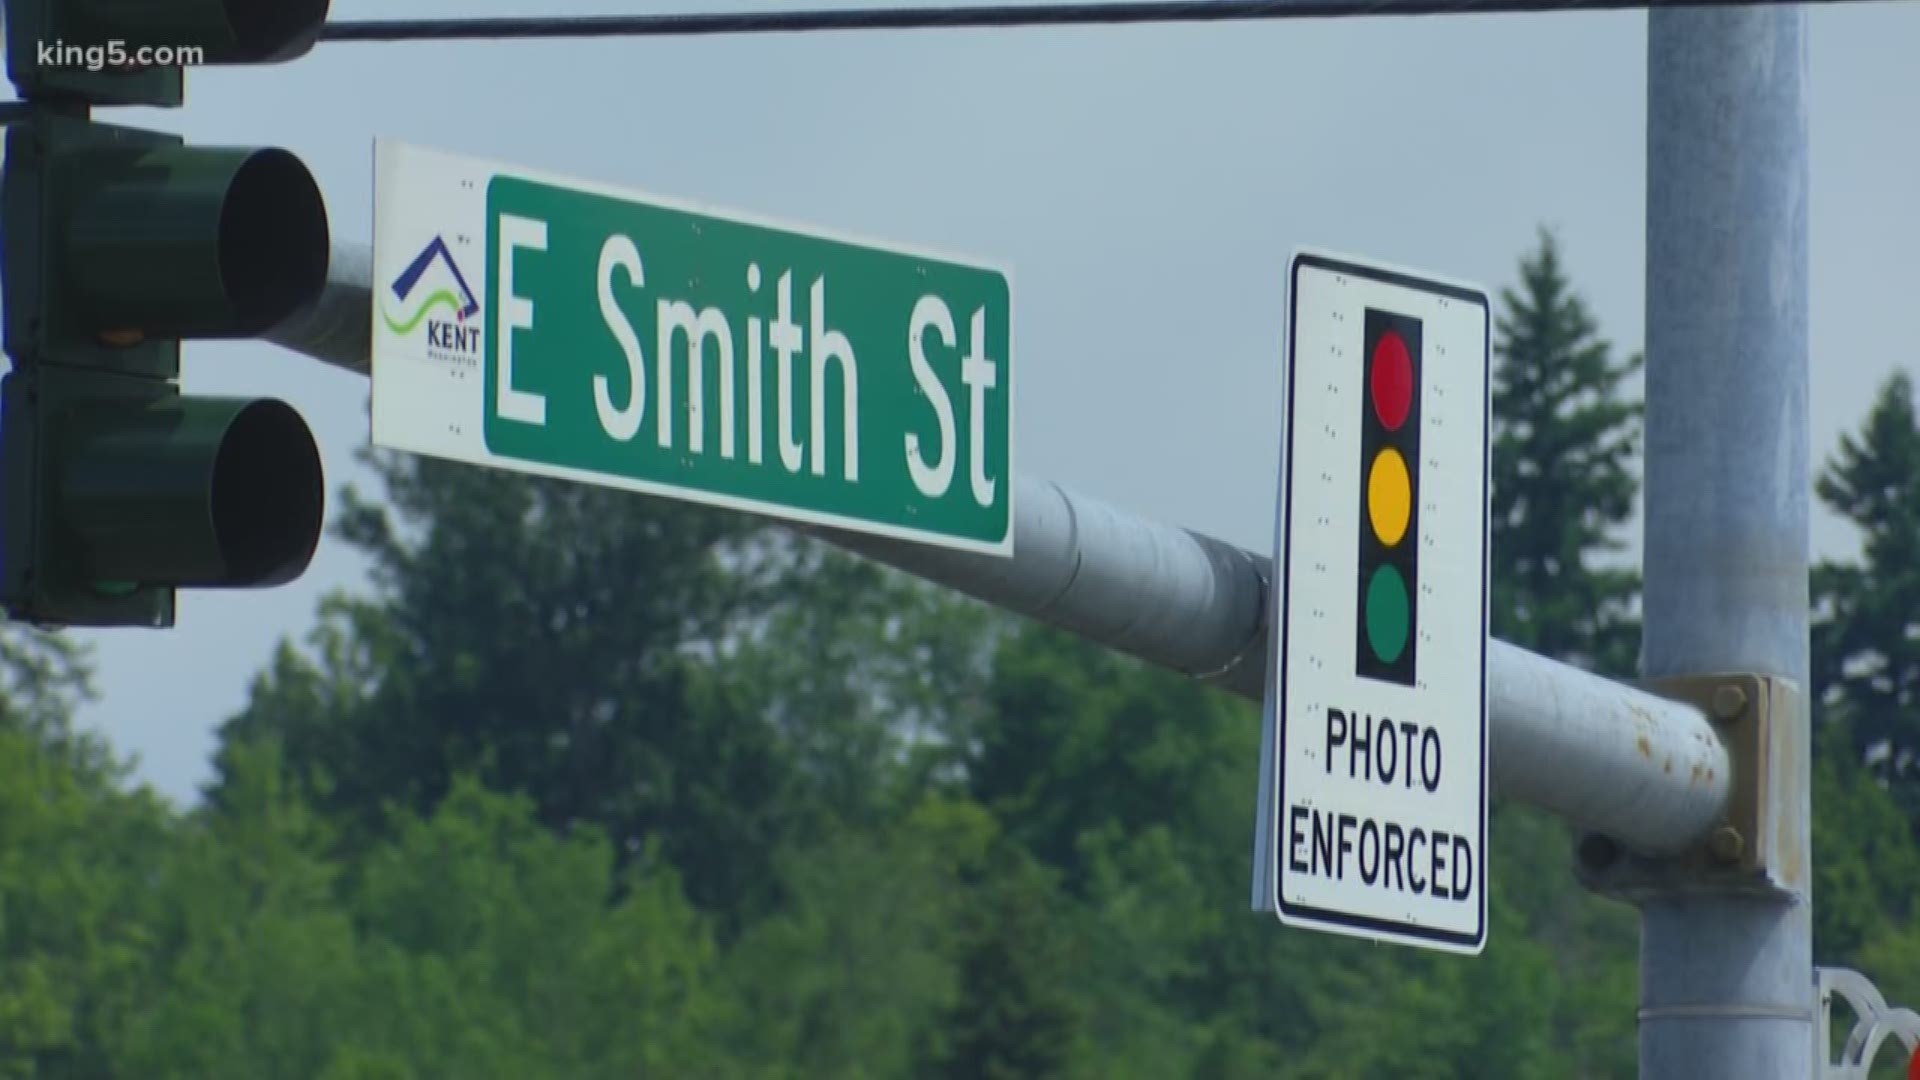 Red light cameras are coming to Kent and starting Monday police will sending you a warning if the cameras catch you.